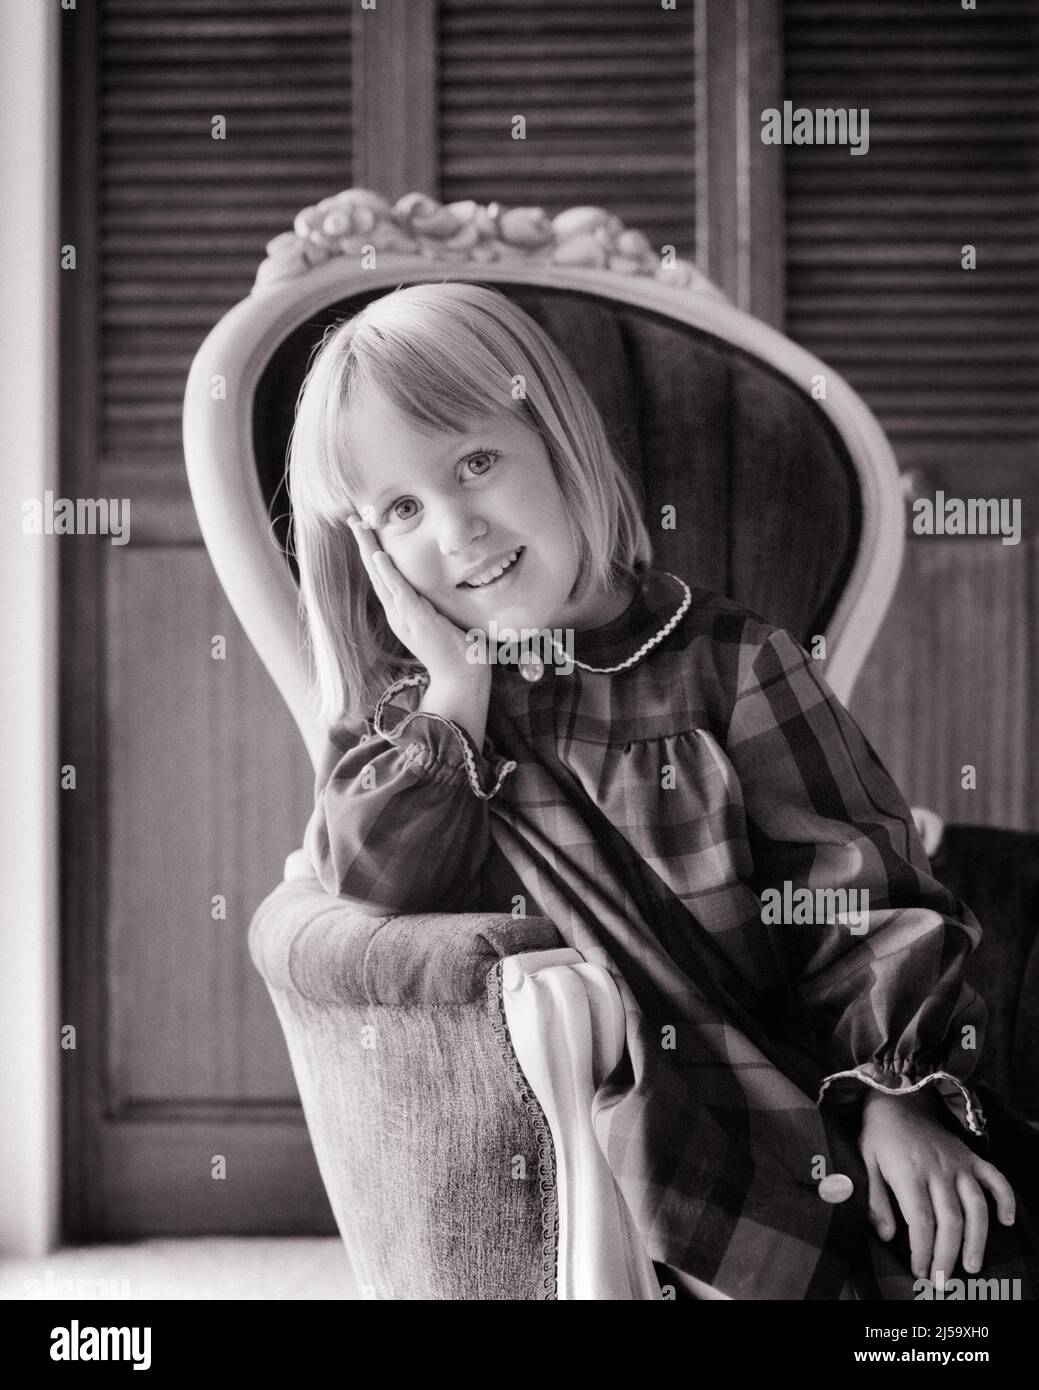 1960s PORTRAIT OF SMILING BLONDE GIRL RESTING HER HEAD IN HER HAND LOOKING AT CAMERA SITTING IN FRENCH PROVINCIAL CHAIR - j13592 HAR001 HARS LIFESTYLE FEMALES WINNING STUDIO SHOT HOME LIFE COPY SPACE HALF-LENGTH CONFIDENCE EXPRESSIONS B&W RESTING EYE CONTACT HAPPINESS BRIGHT CHEERFUL PRIDE SMILES CONCEPTUAL JOYFUL PROVINCIAL STYLISH CHARMING GROWTH JUVENILES BLACK AND WHITE CAUCASIAN ETHNICITY HAR001 OLD FASHIONED Stock Photo